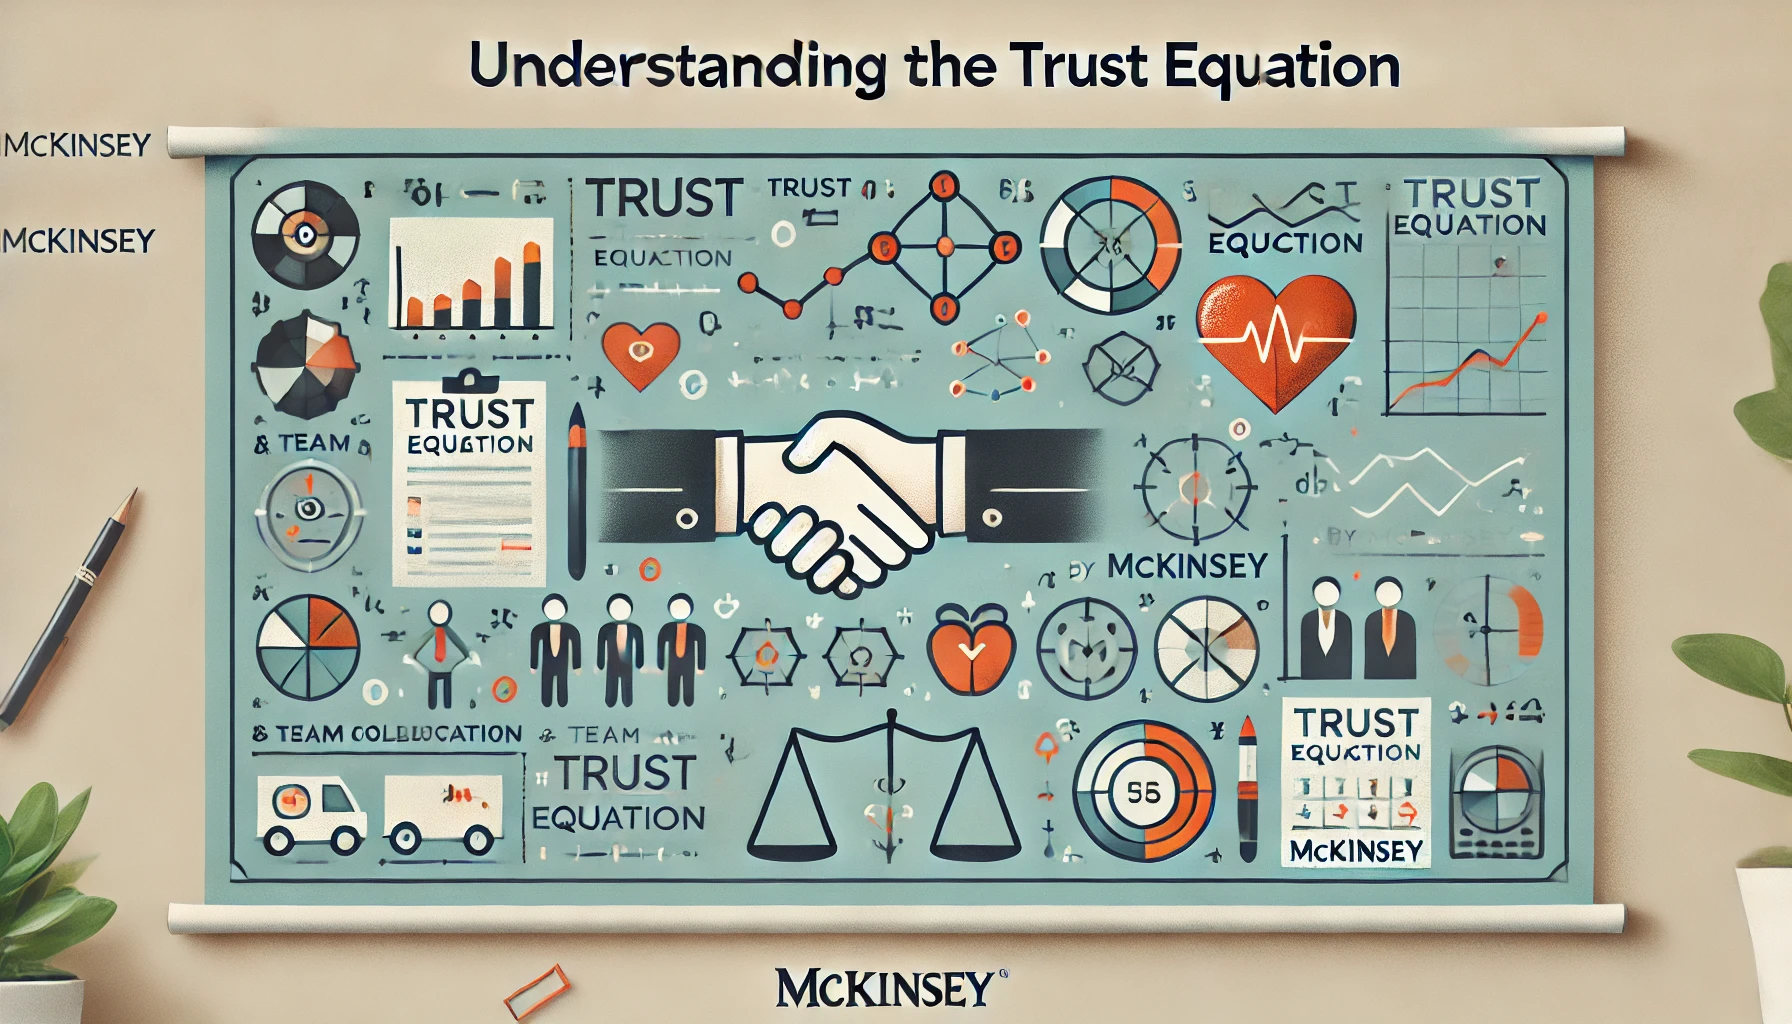 A comprehensive guide to understanding the Trust Equation by McKinsey and its impact on organizational performance.